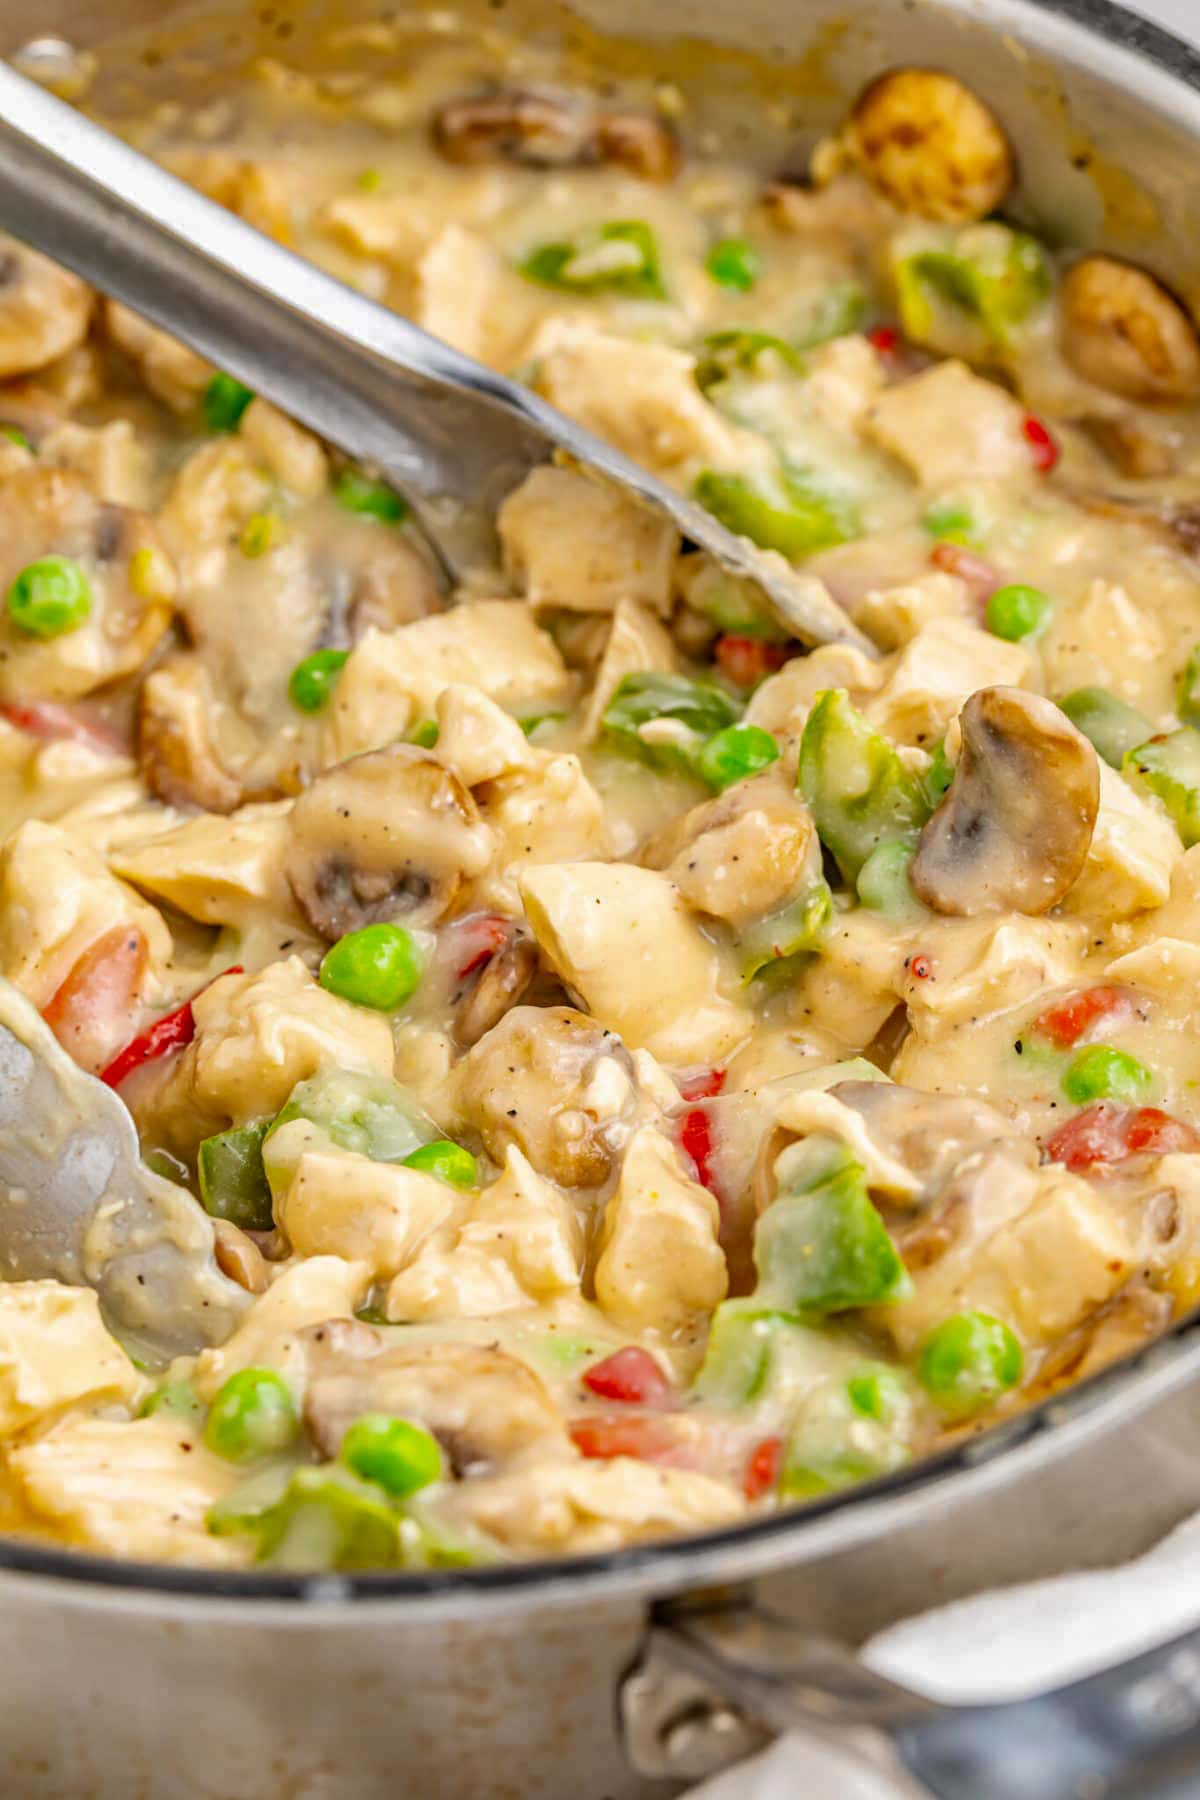 Creamy chicken a la king in a large silver skillet with bright green peas and a pair of silver tongs.